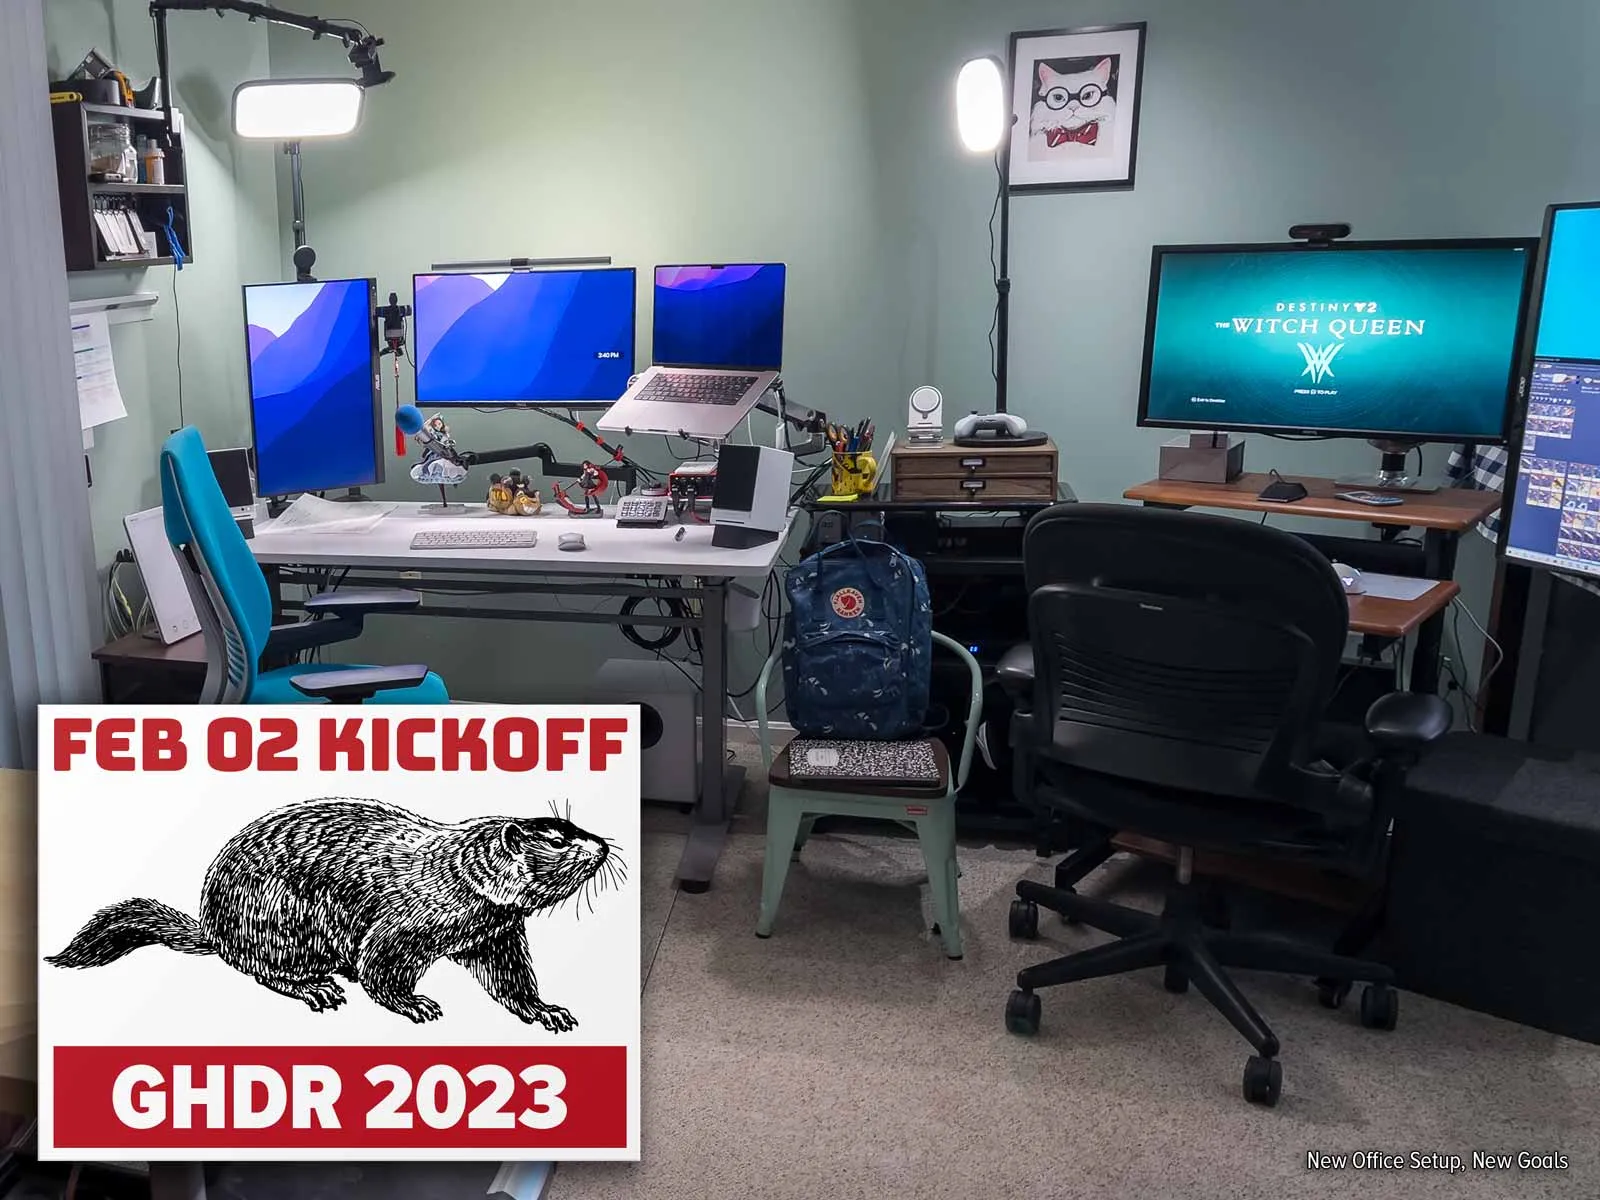 picture of Sri's office space (full size image)